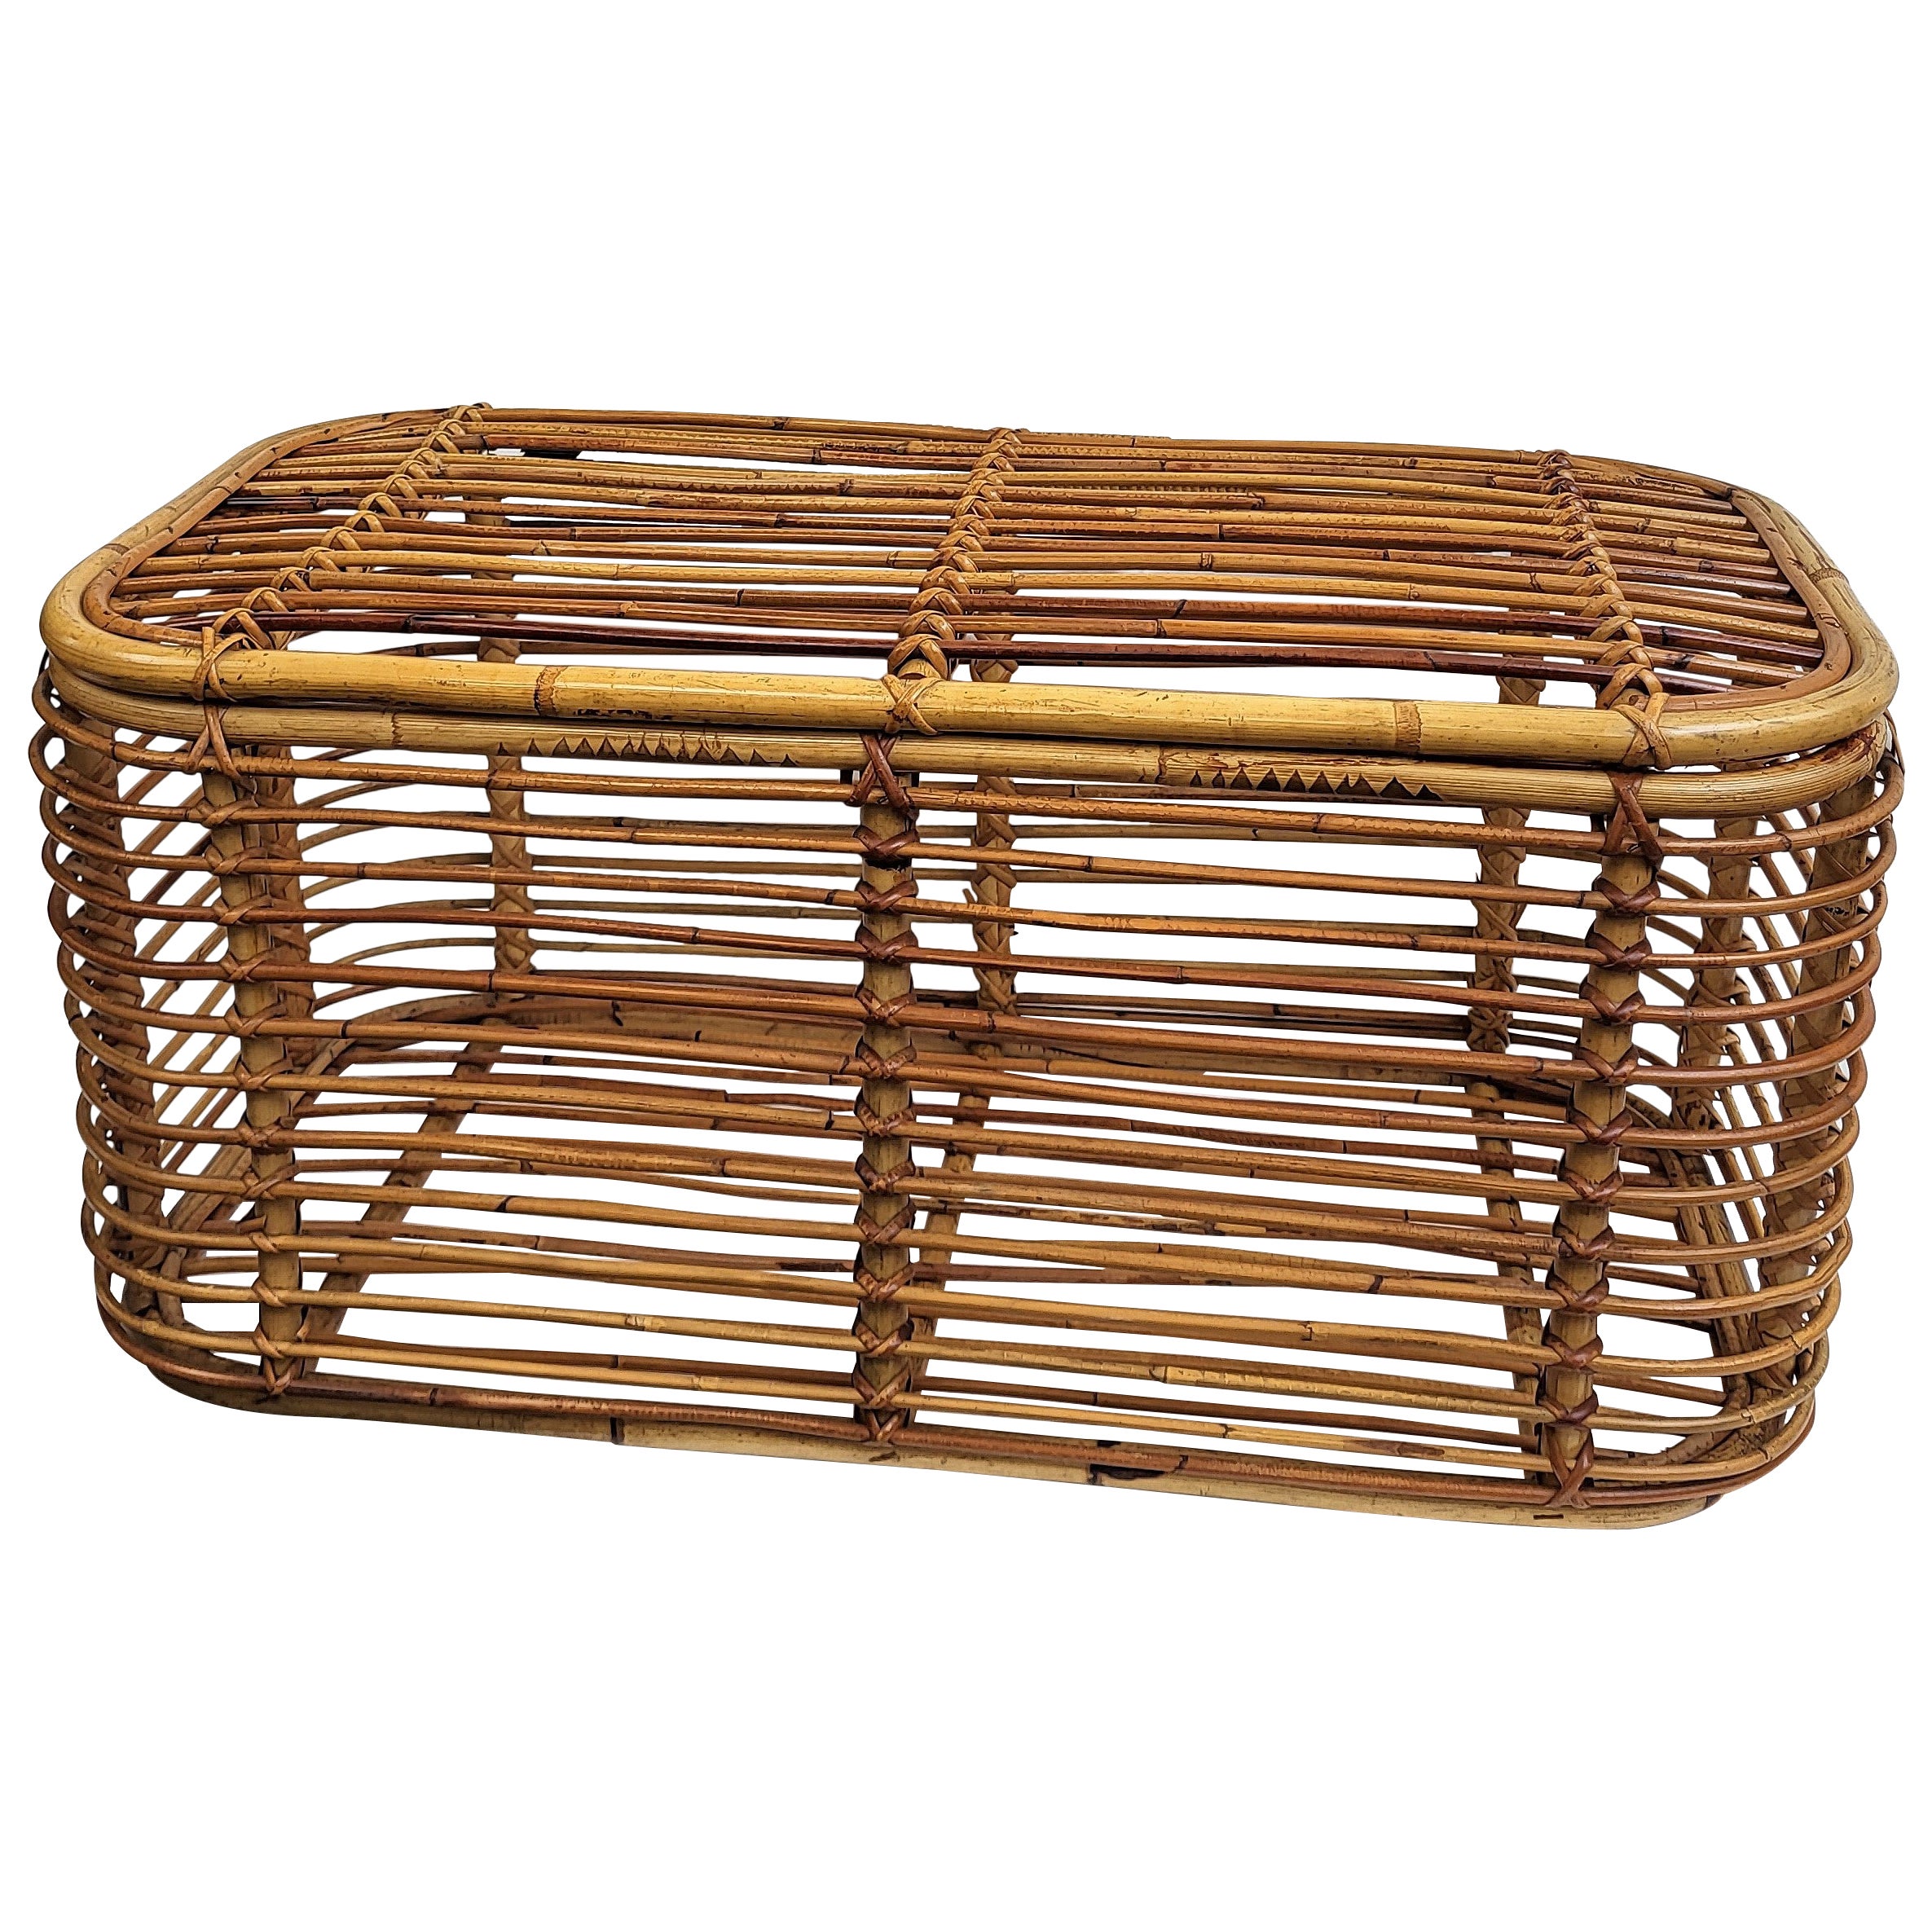 1960s Italian Designer Bamboo Rattan Bohemian French Riviera Basket Container For Sale